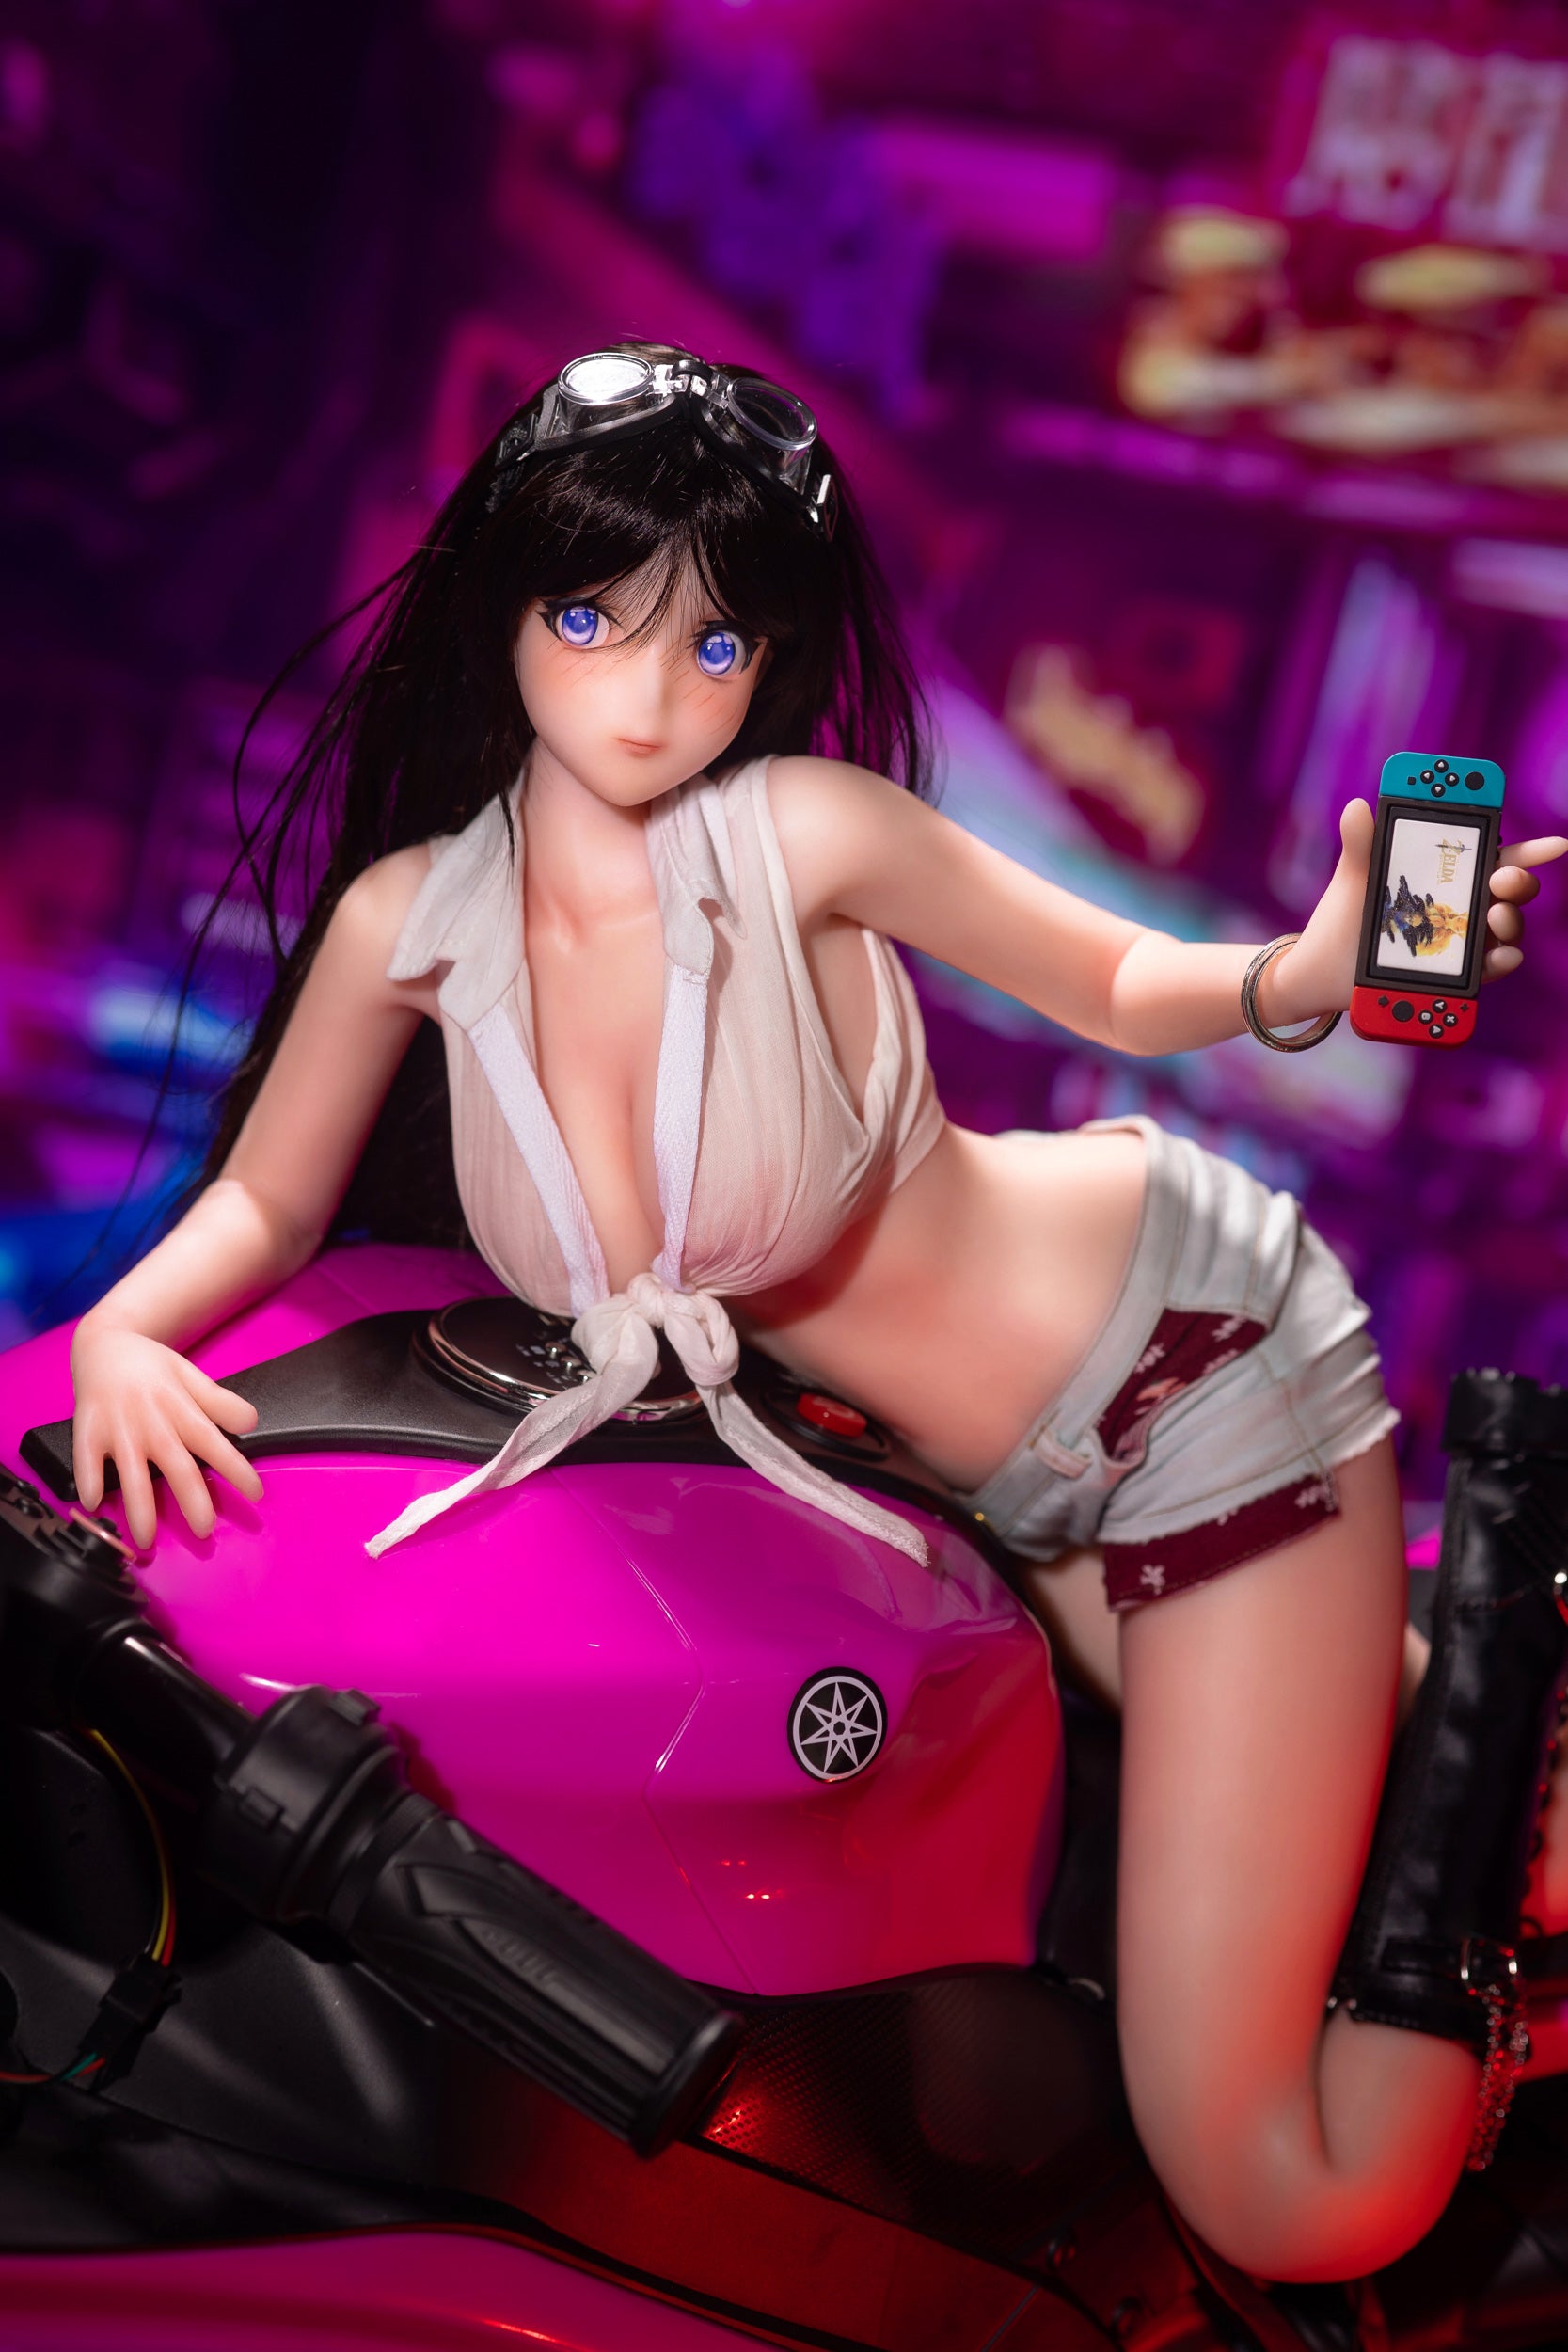 Aibei Doll 72 cm Silicone - Yumi (USA) | Buy Sex Dolls at DOLLS ACTUALLY